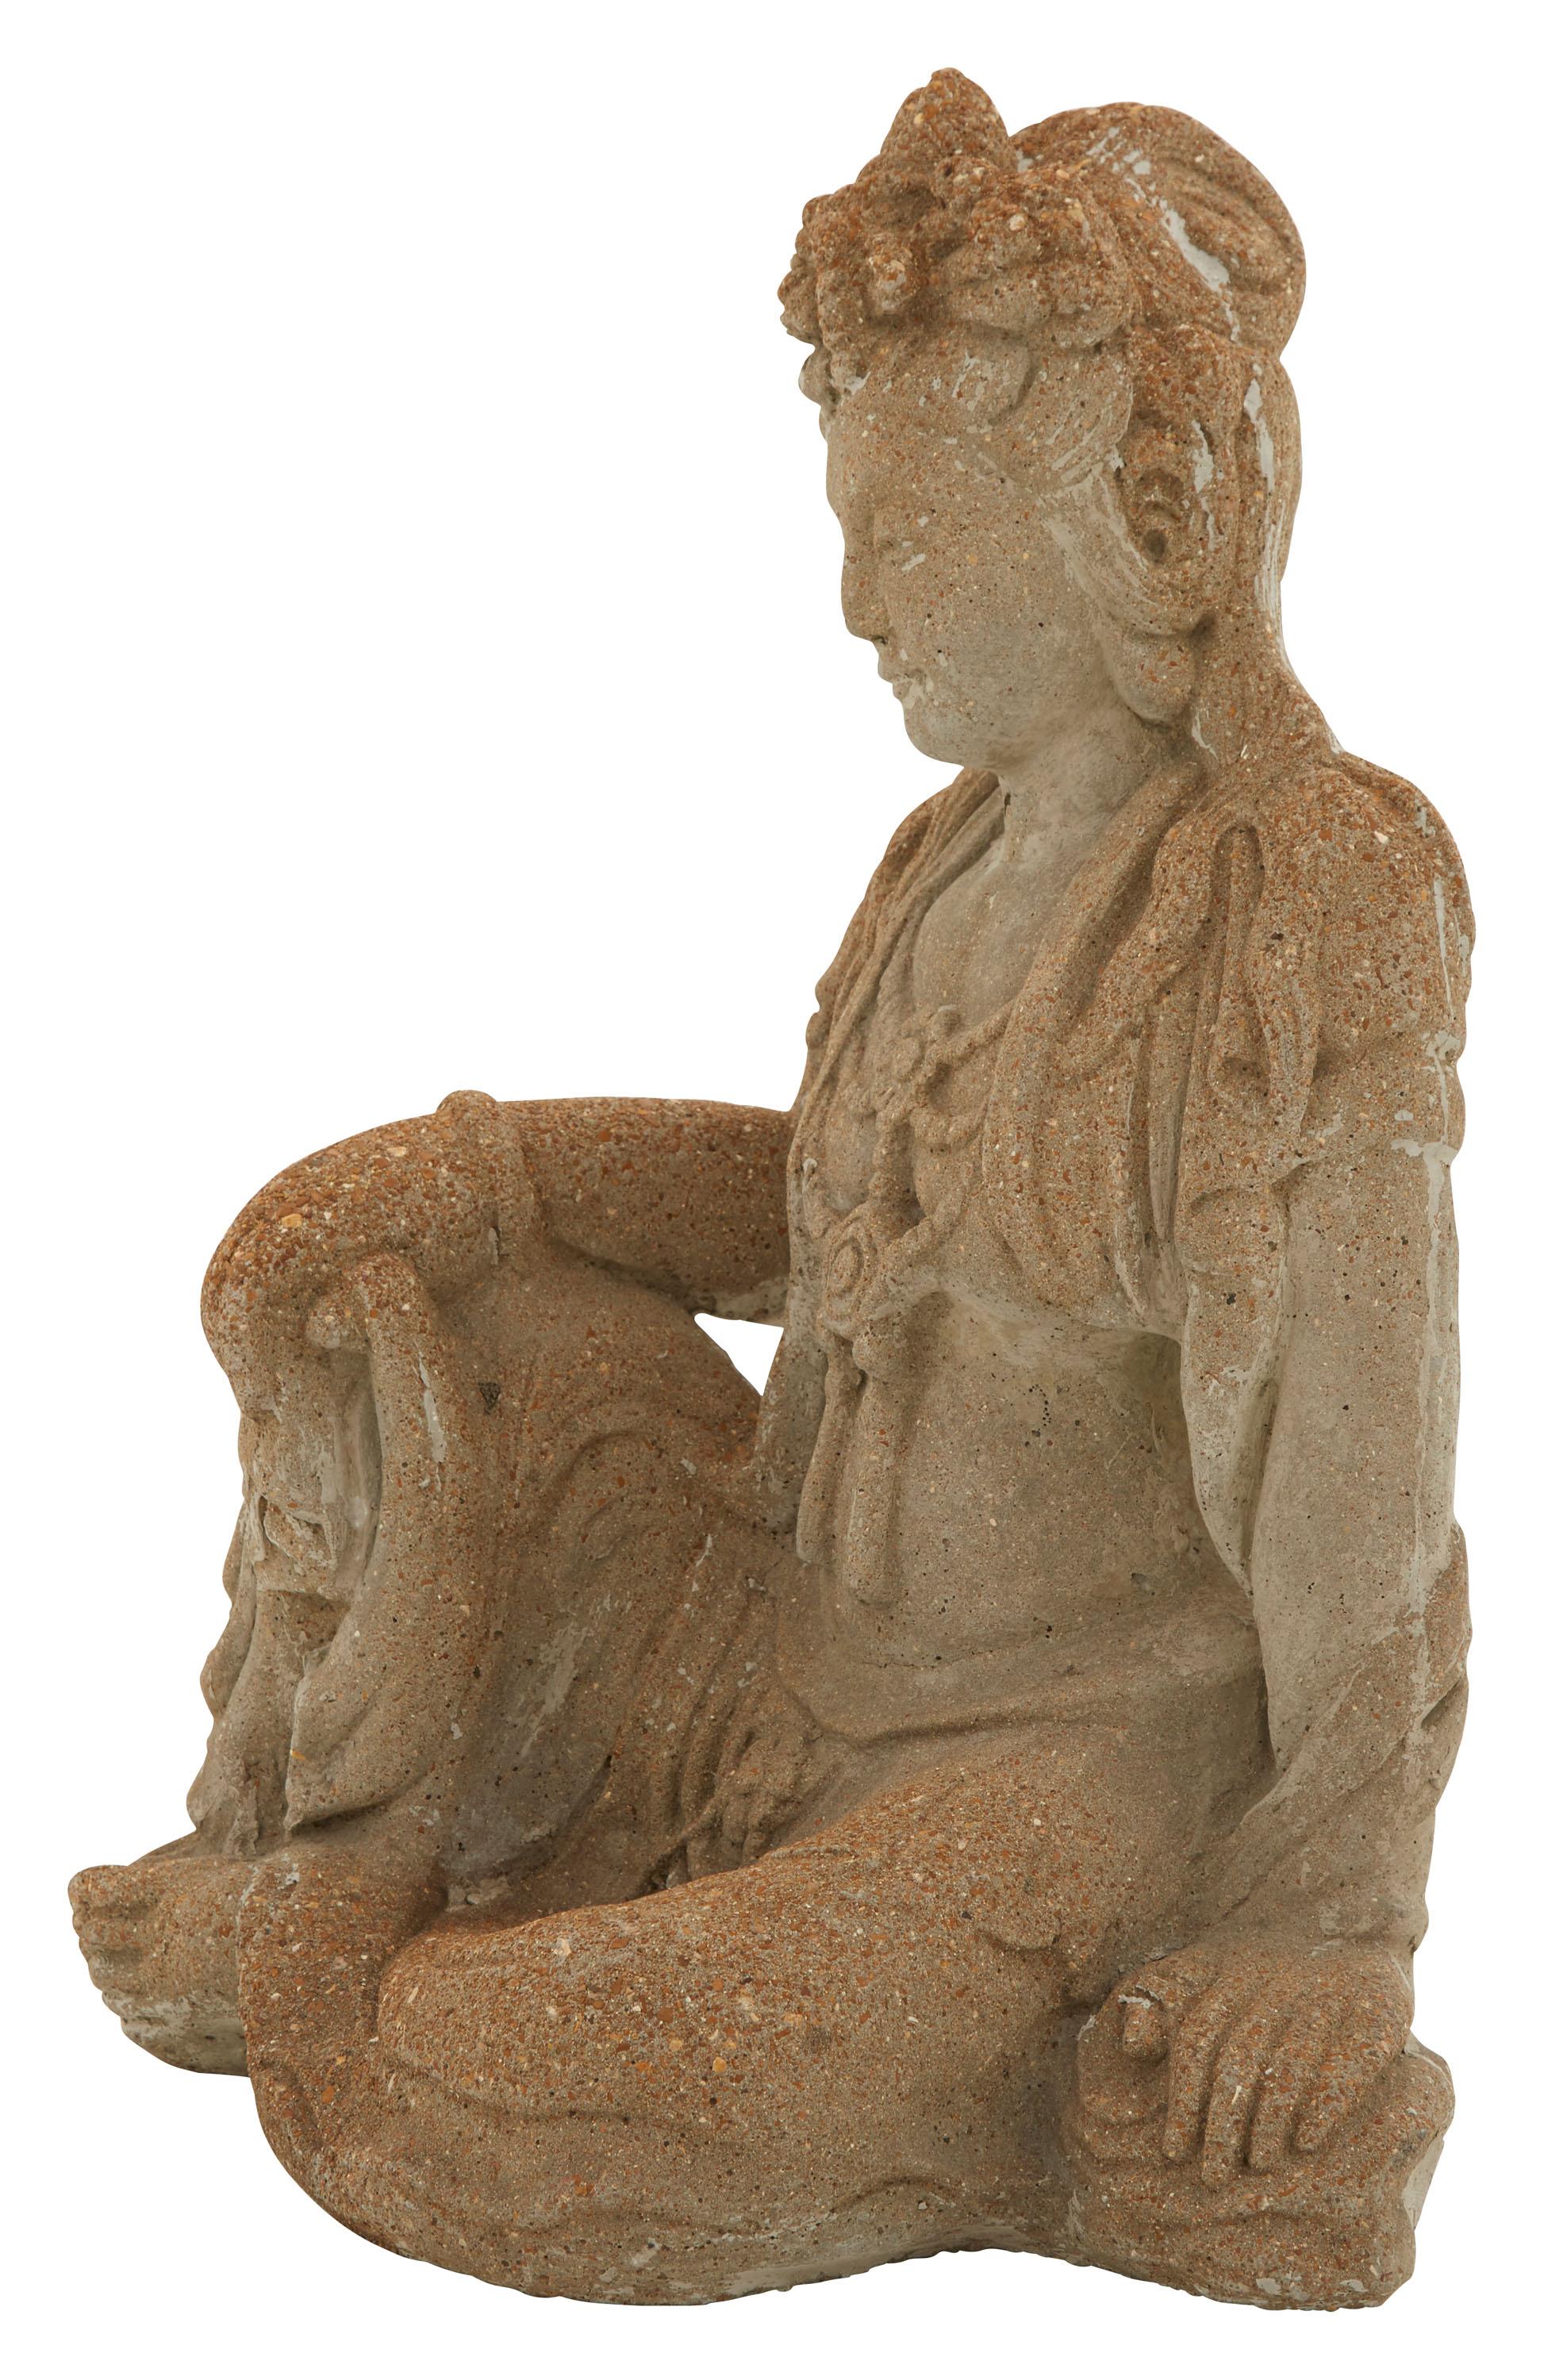 • Statue of the female Buddha, also known as Tara
• Cement
• Patinated finish
• 20th century
• American.
• Measures: 22